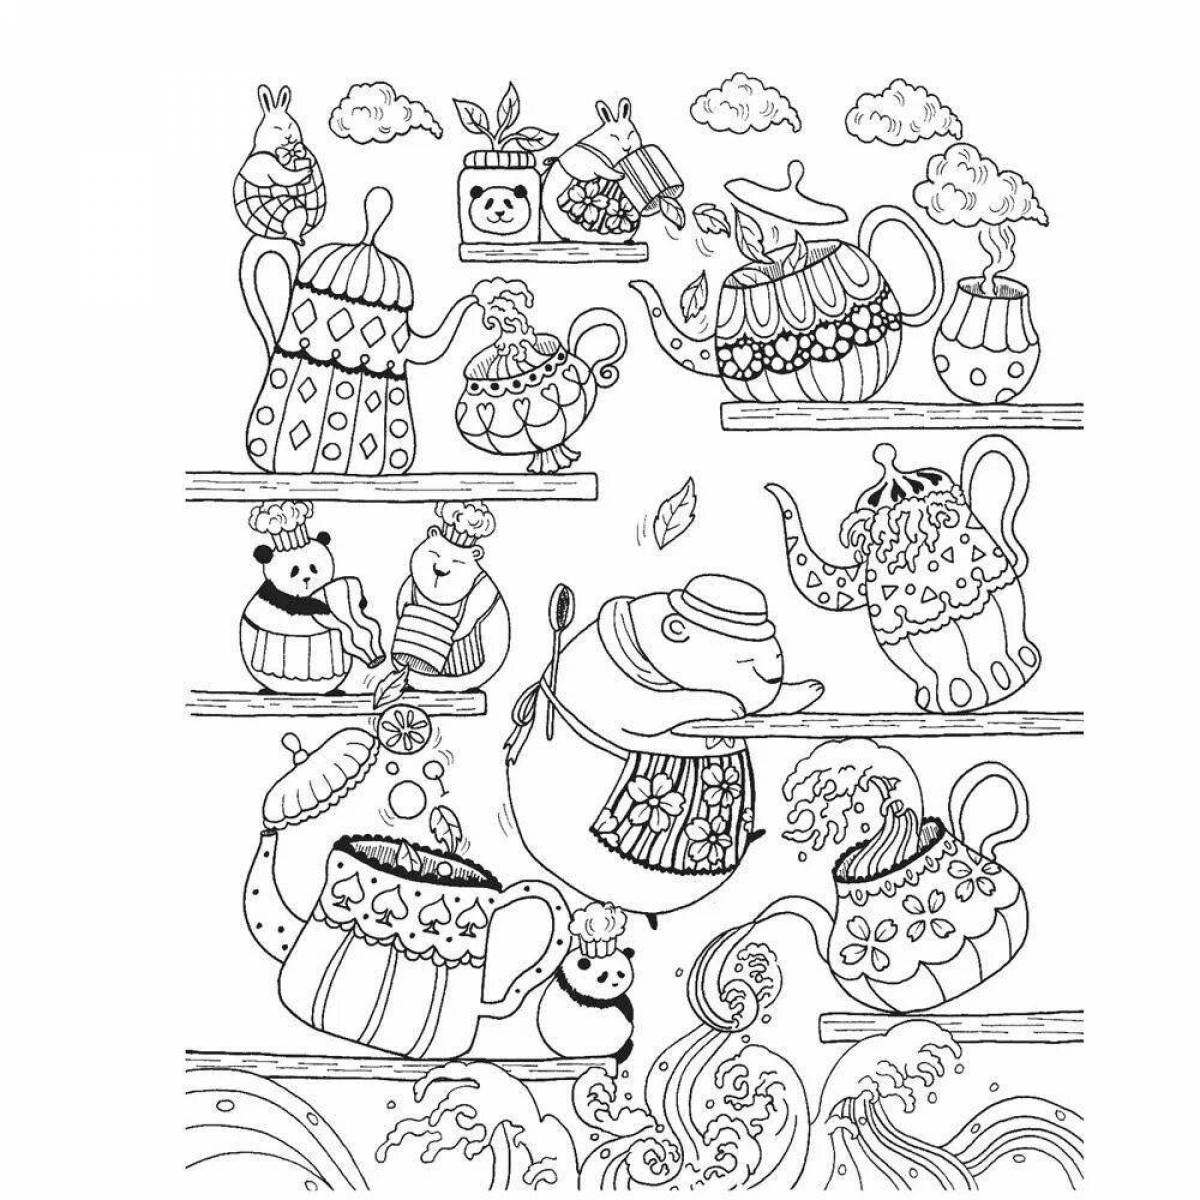 Million bears wild coloring page